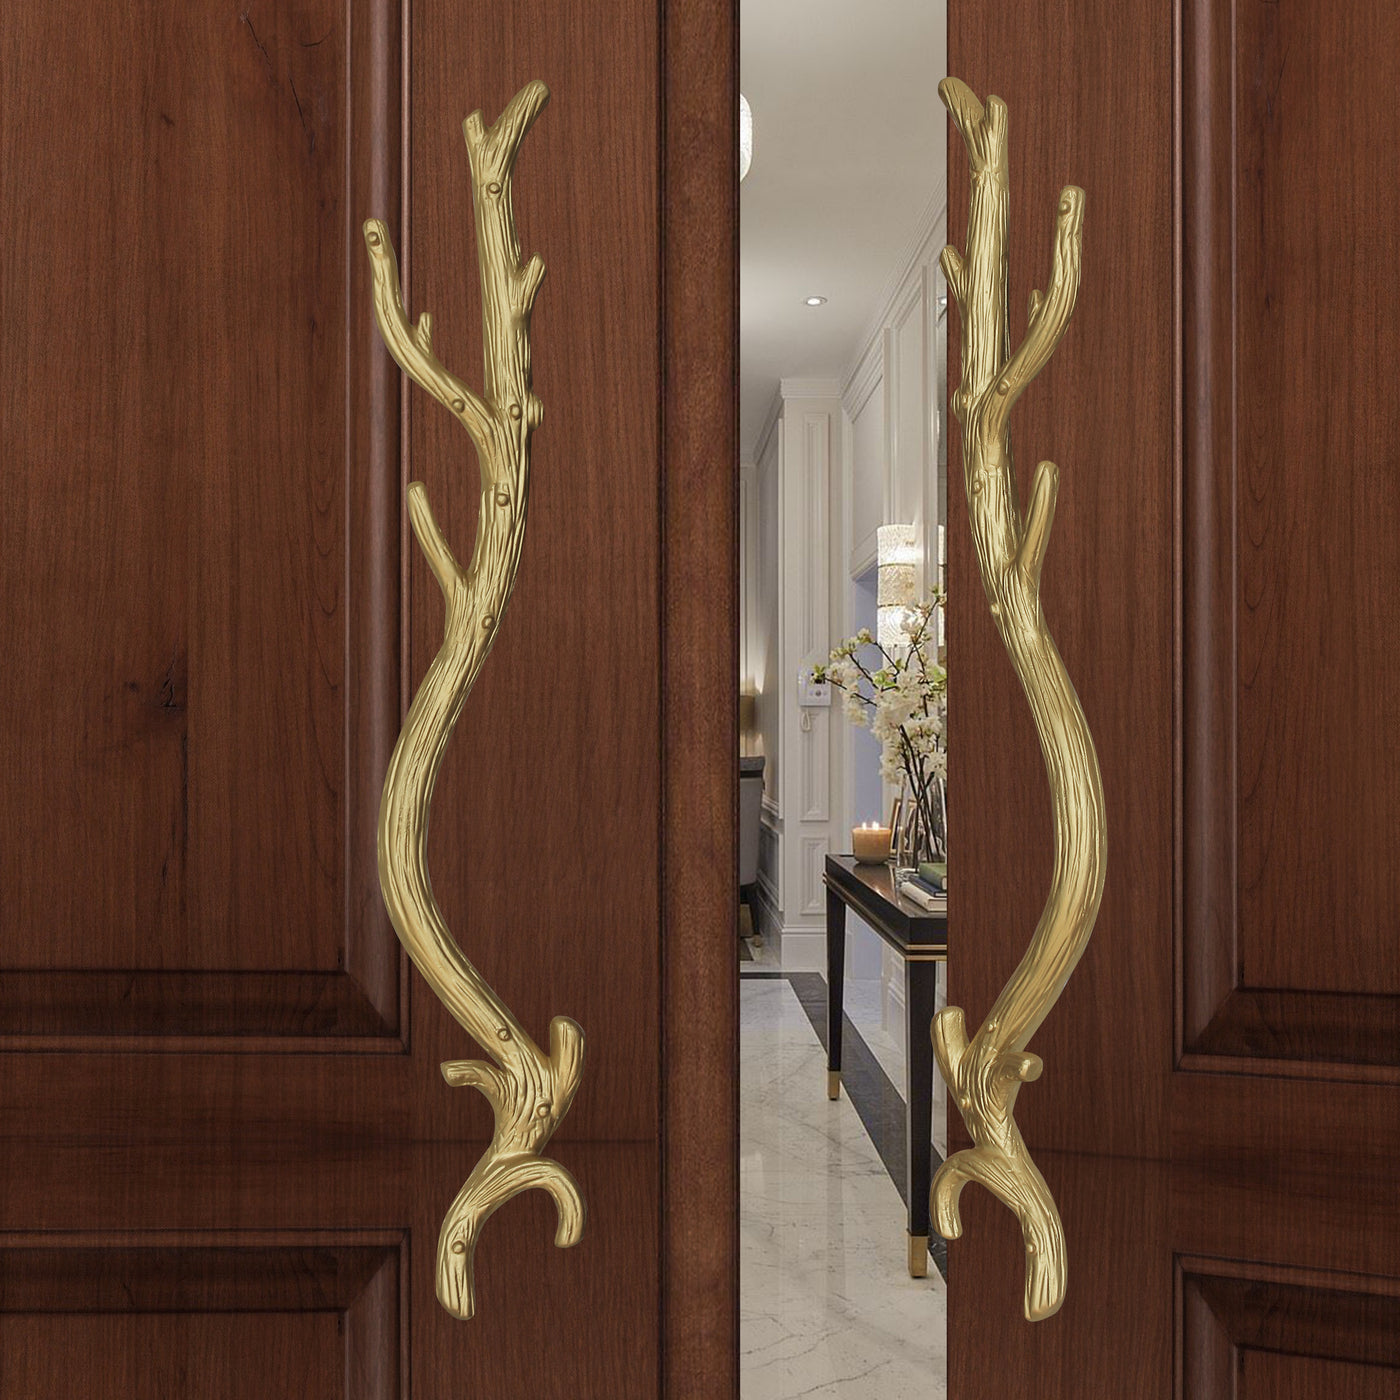 A pair of gold decorative pull handles inspired by branches mounted on an opened wooden door